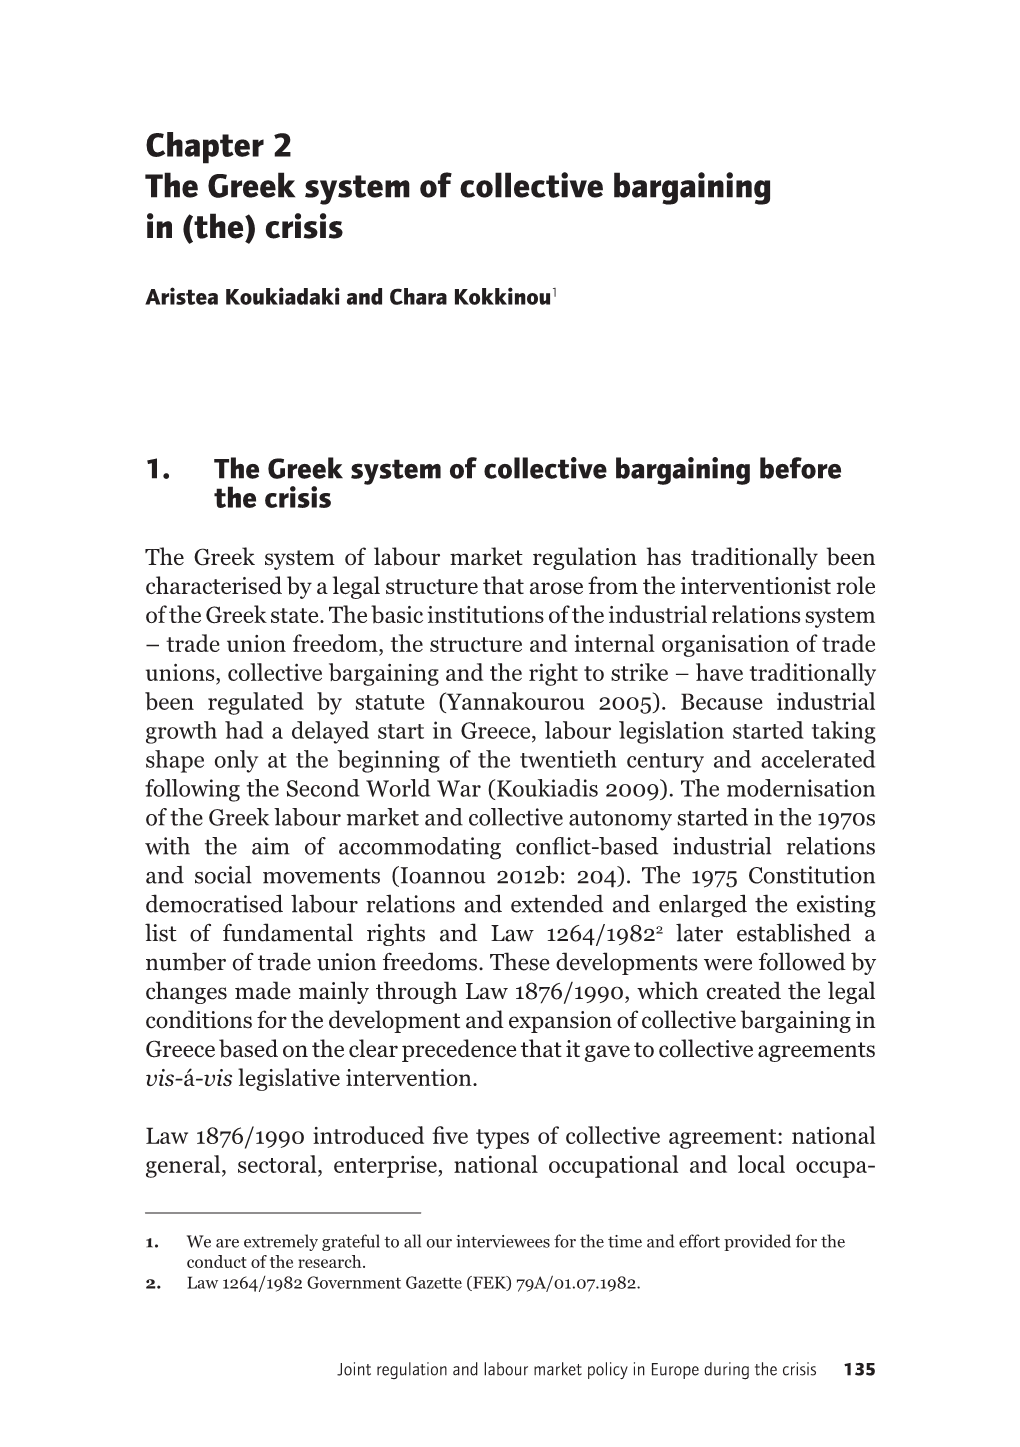 Chapter 2 the Greek System of Collective Bargaining in (The) Crisis